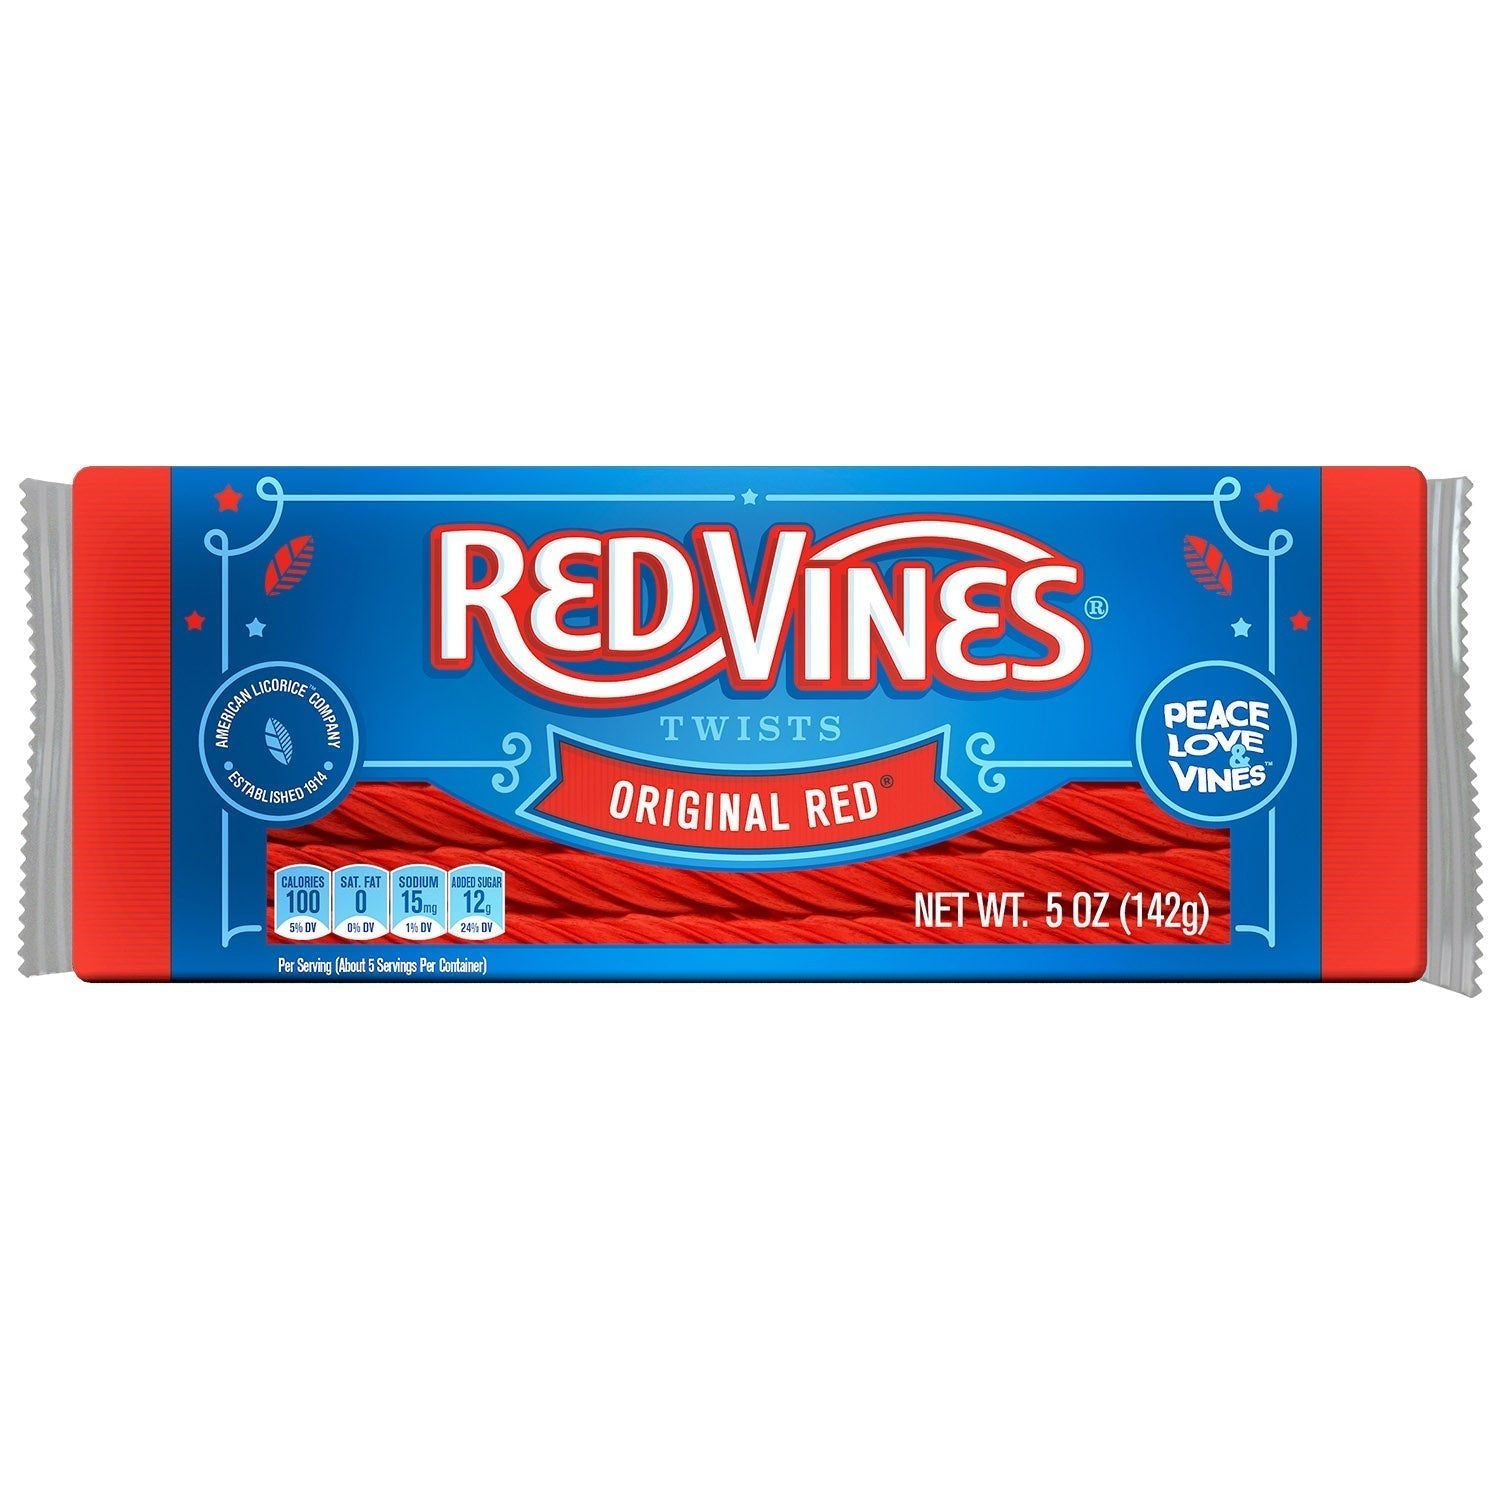 Red Vines Original Red® Chewy Licorice Twists 5 oz